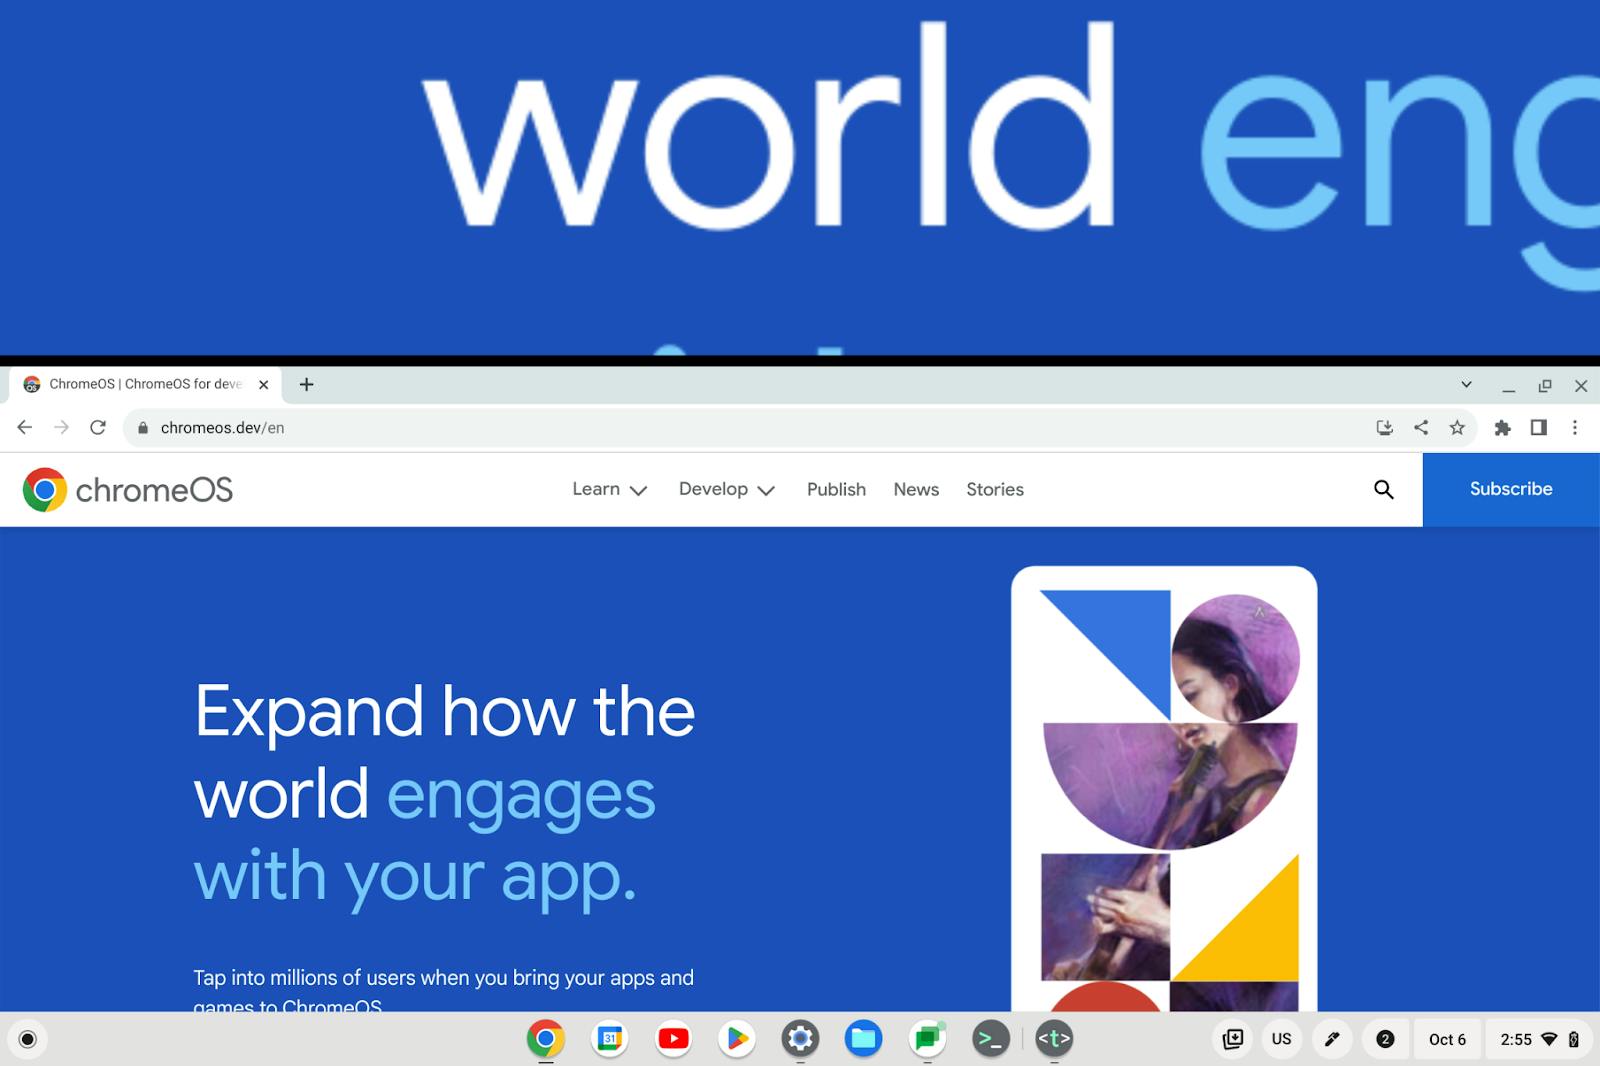 A view of the chromeOS.dev home page with the docked magnifier feature on and focused on the word "world."